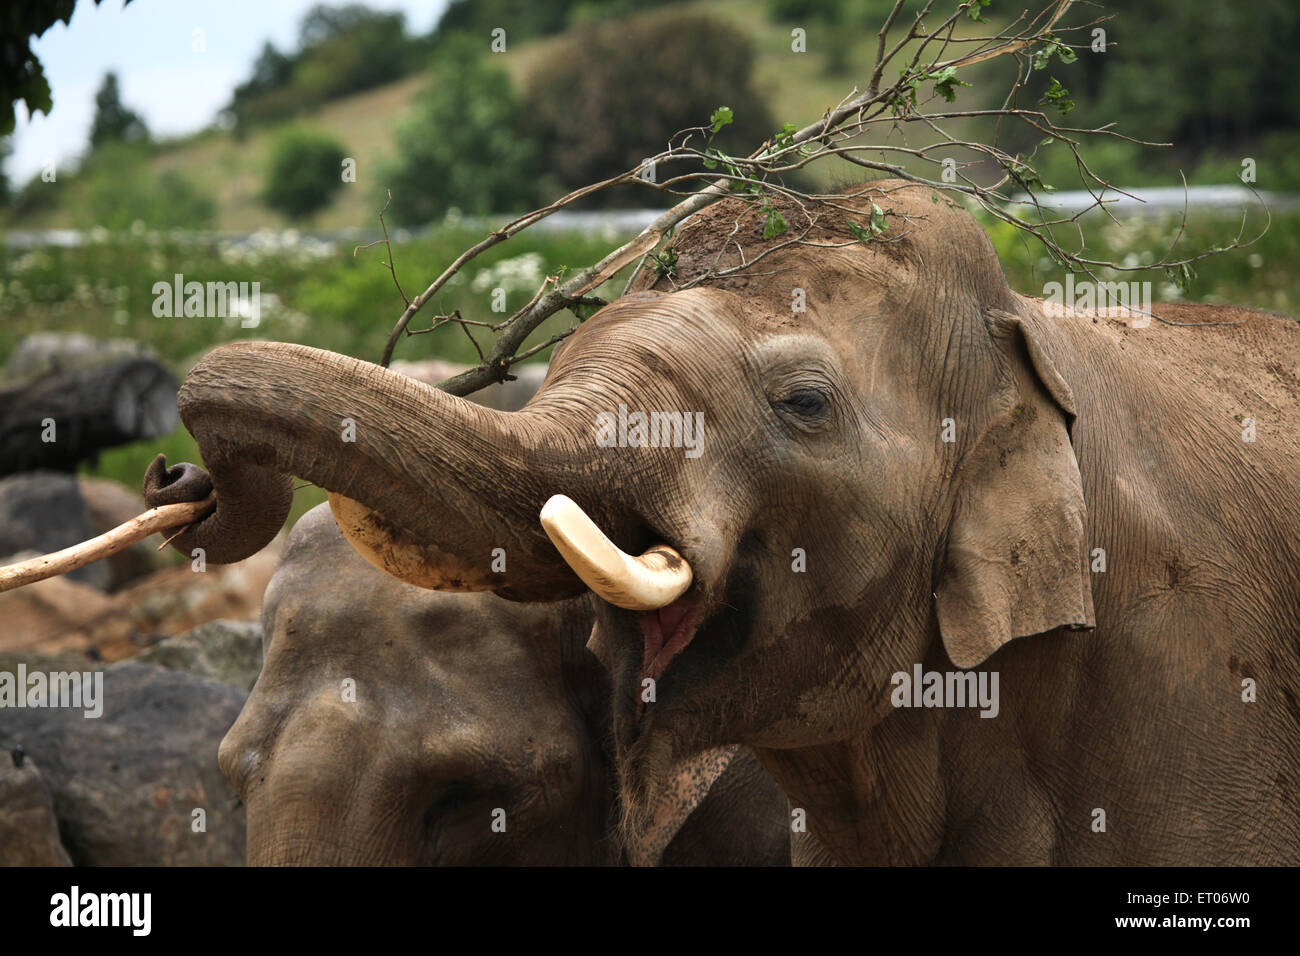 Indian elephant (Elephas maximus indicus) uses trunk to scratch its back with branch at Prague Zoo, Czech Republic. Stock Photo